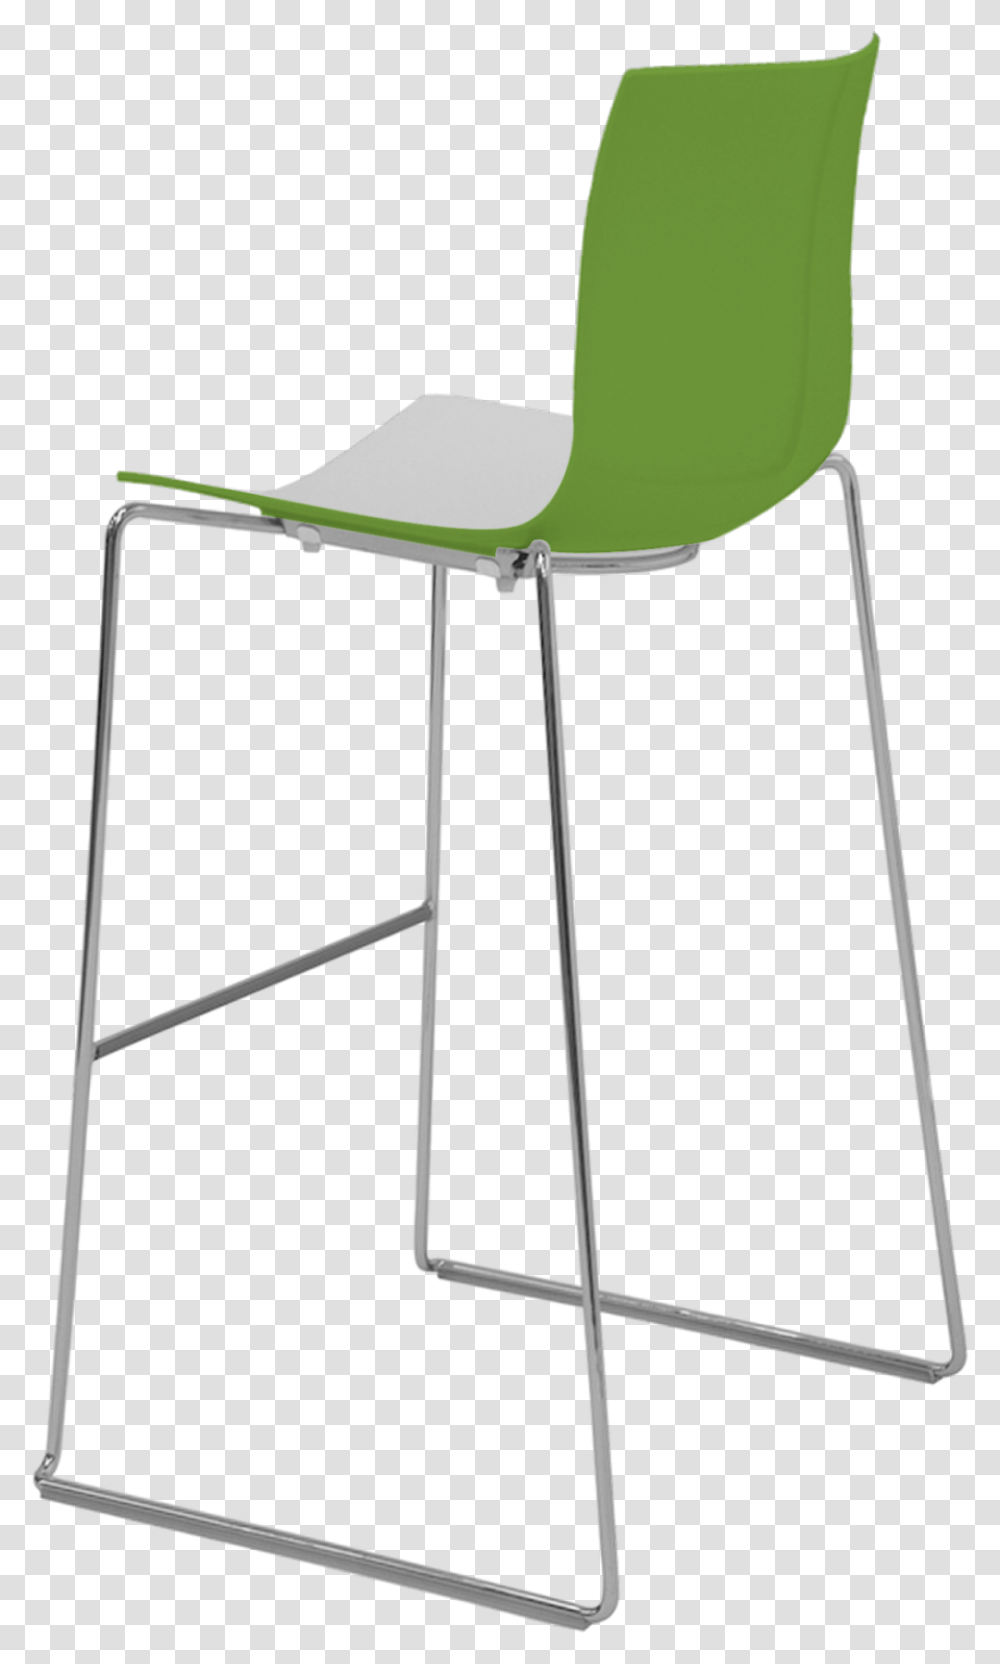 Arper Catifa 46 Bar Stool White Green, Chair, Furniture, Utility Pole, Stand Transparent Png